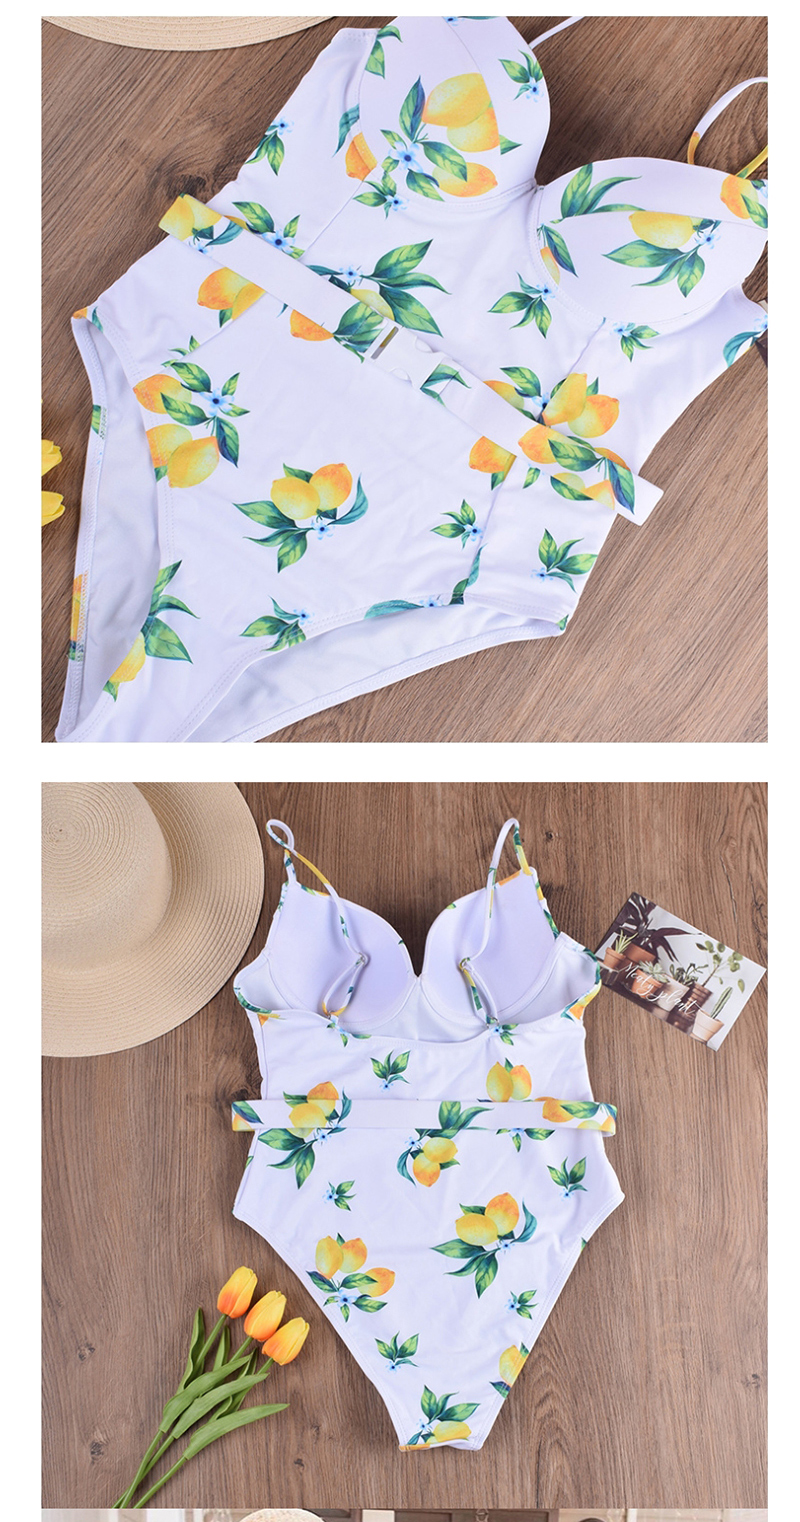 Fashion Flower On White Printed Hard Pack Waistband Swimwear,One Pieces